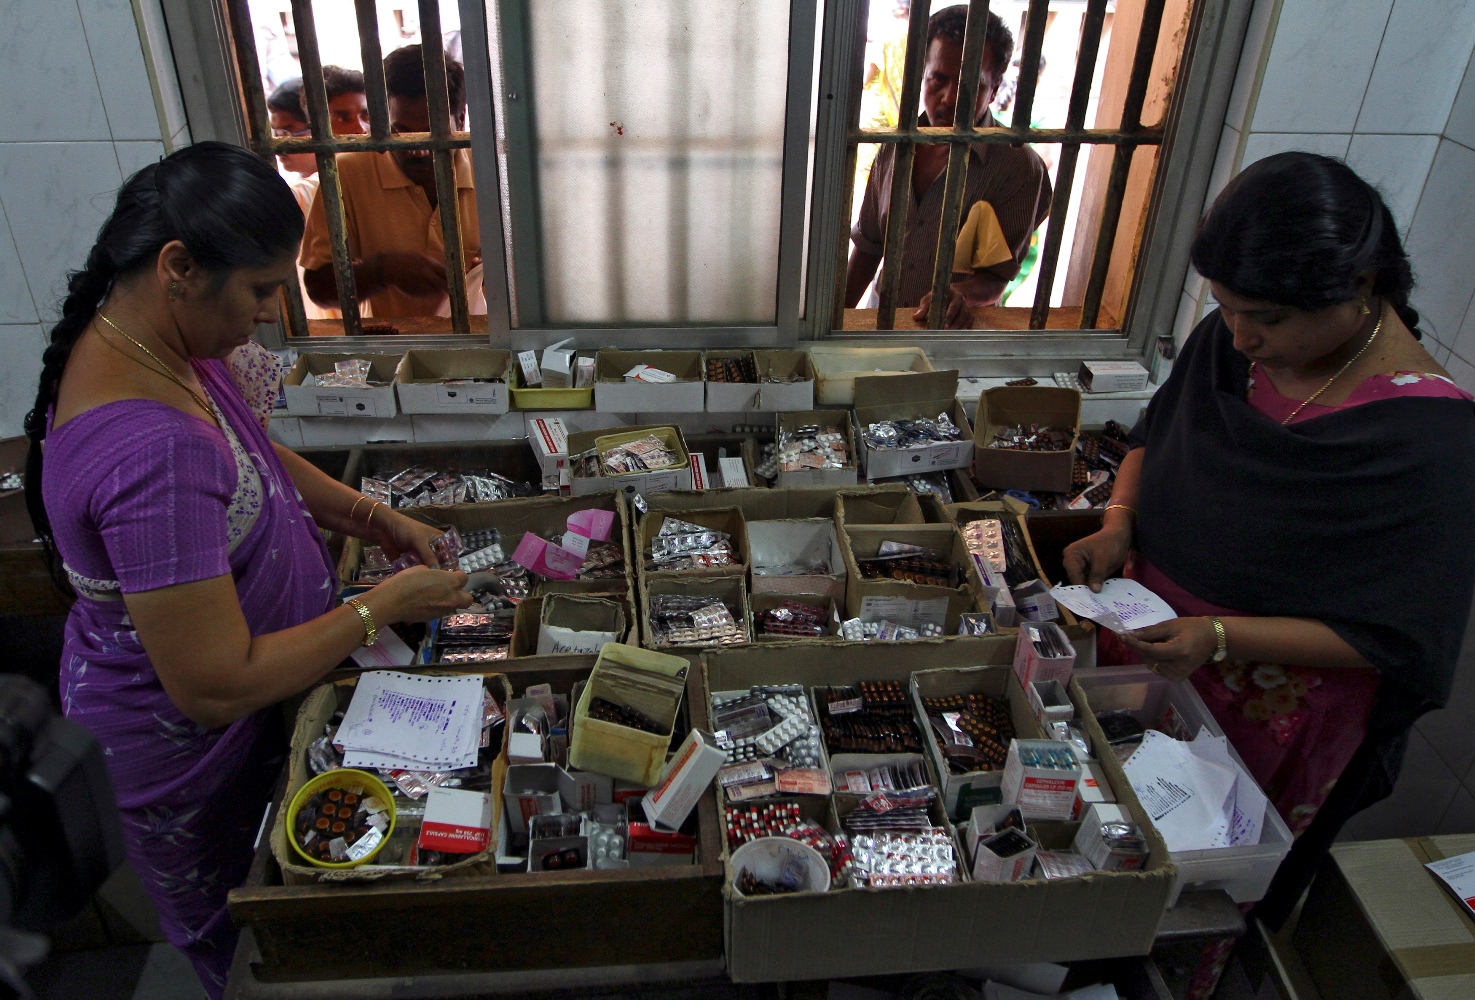 Pharmacists dispense free medication, provided by the government, to patients at Rajiv Gandhi Government General Hospital (RGGGH) in Chennai July 12, 2012. Chennai is the capital of Tamil Nadu, one of two Indian states offering free medicine for all. The state provides a glimpse of the hurdles India faces as it embarks on a programme to extend free drug coverage nationwide. Picture taken July 12, 2012. To match Analysis INDIA-DRUGS/ REUTERS/Babu (INDIA - Tags: SOCIETY DRUGS HEALTH) - RTR357H6